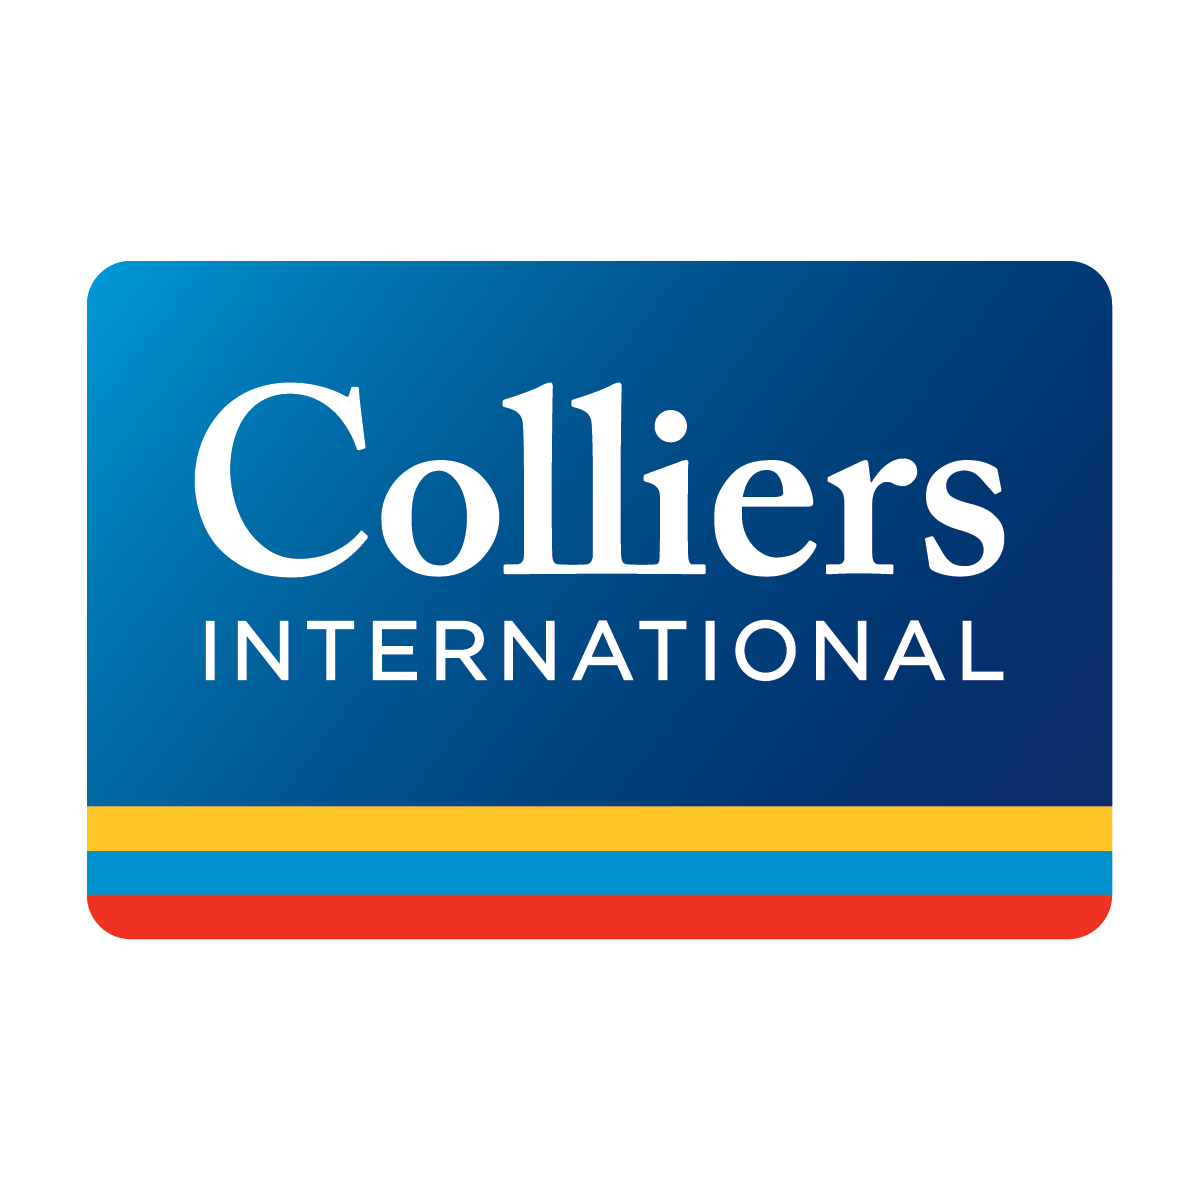 Colliers International logo, with white text on a blue background.